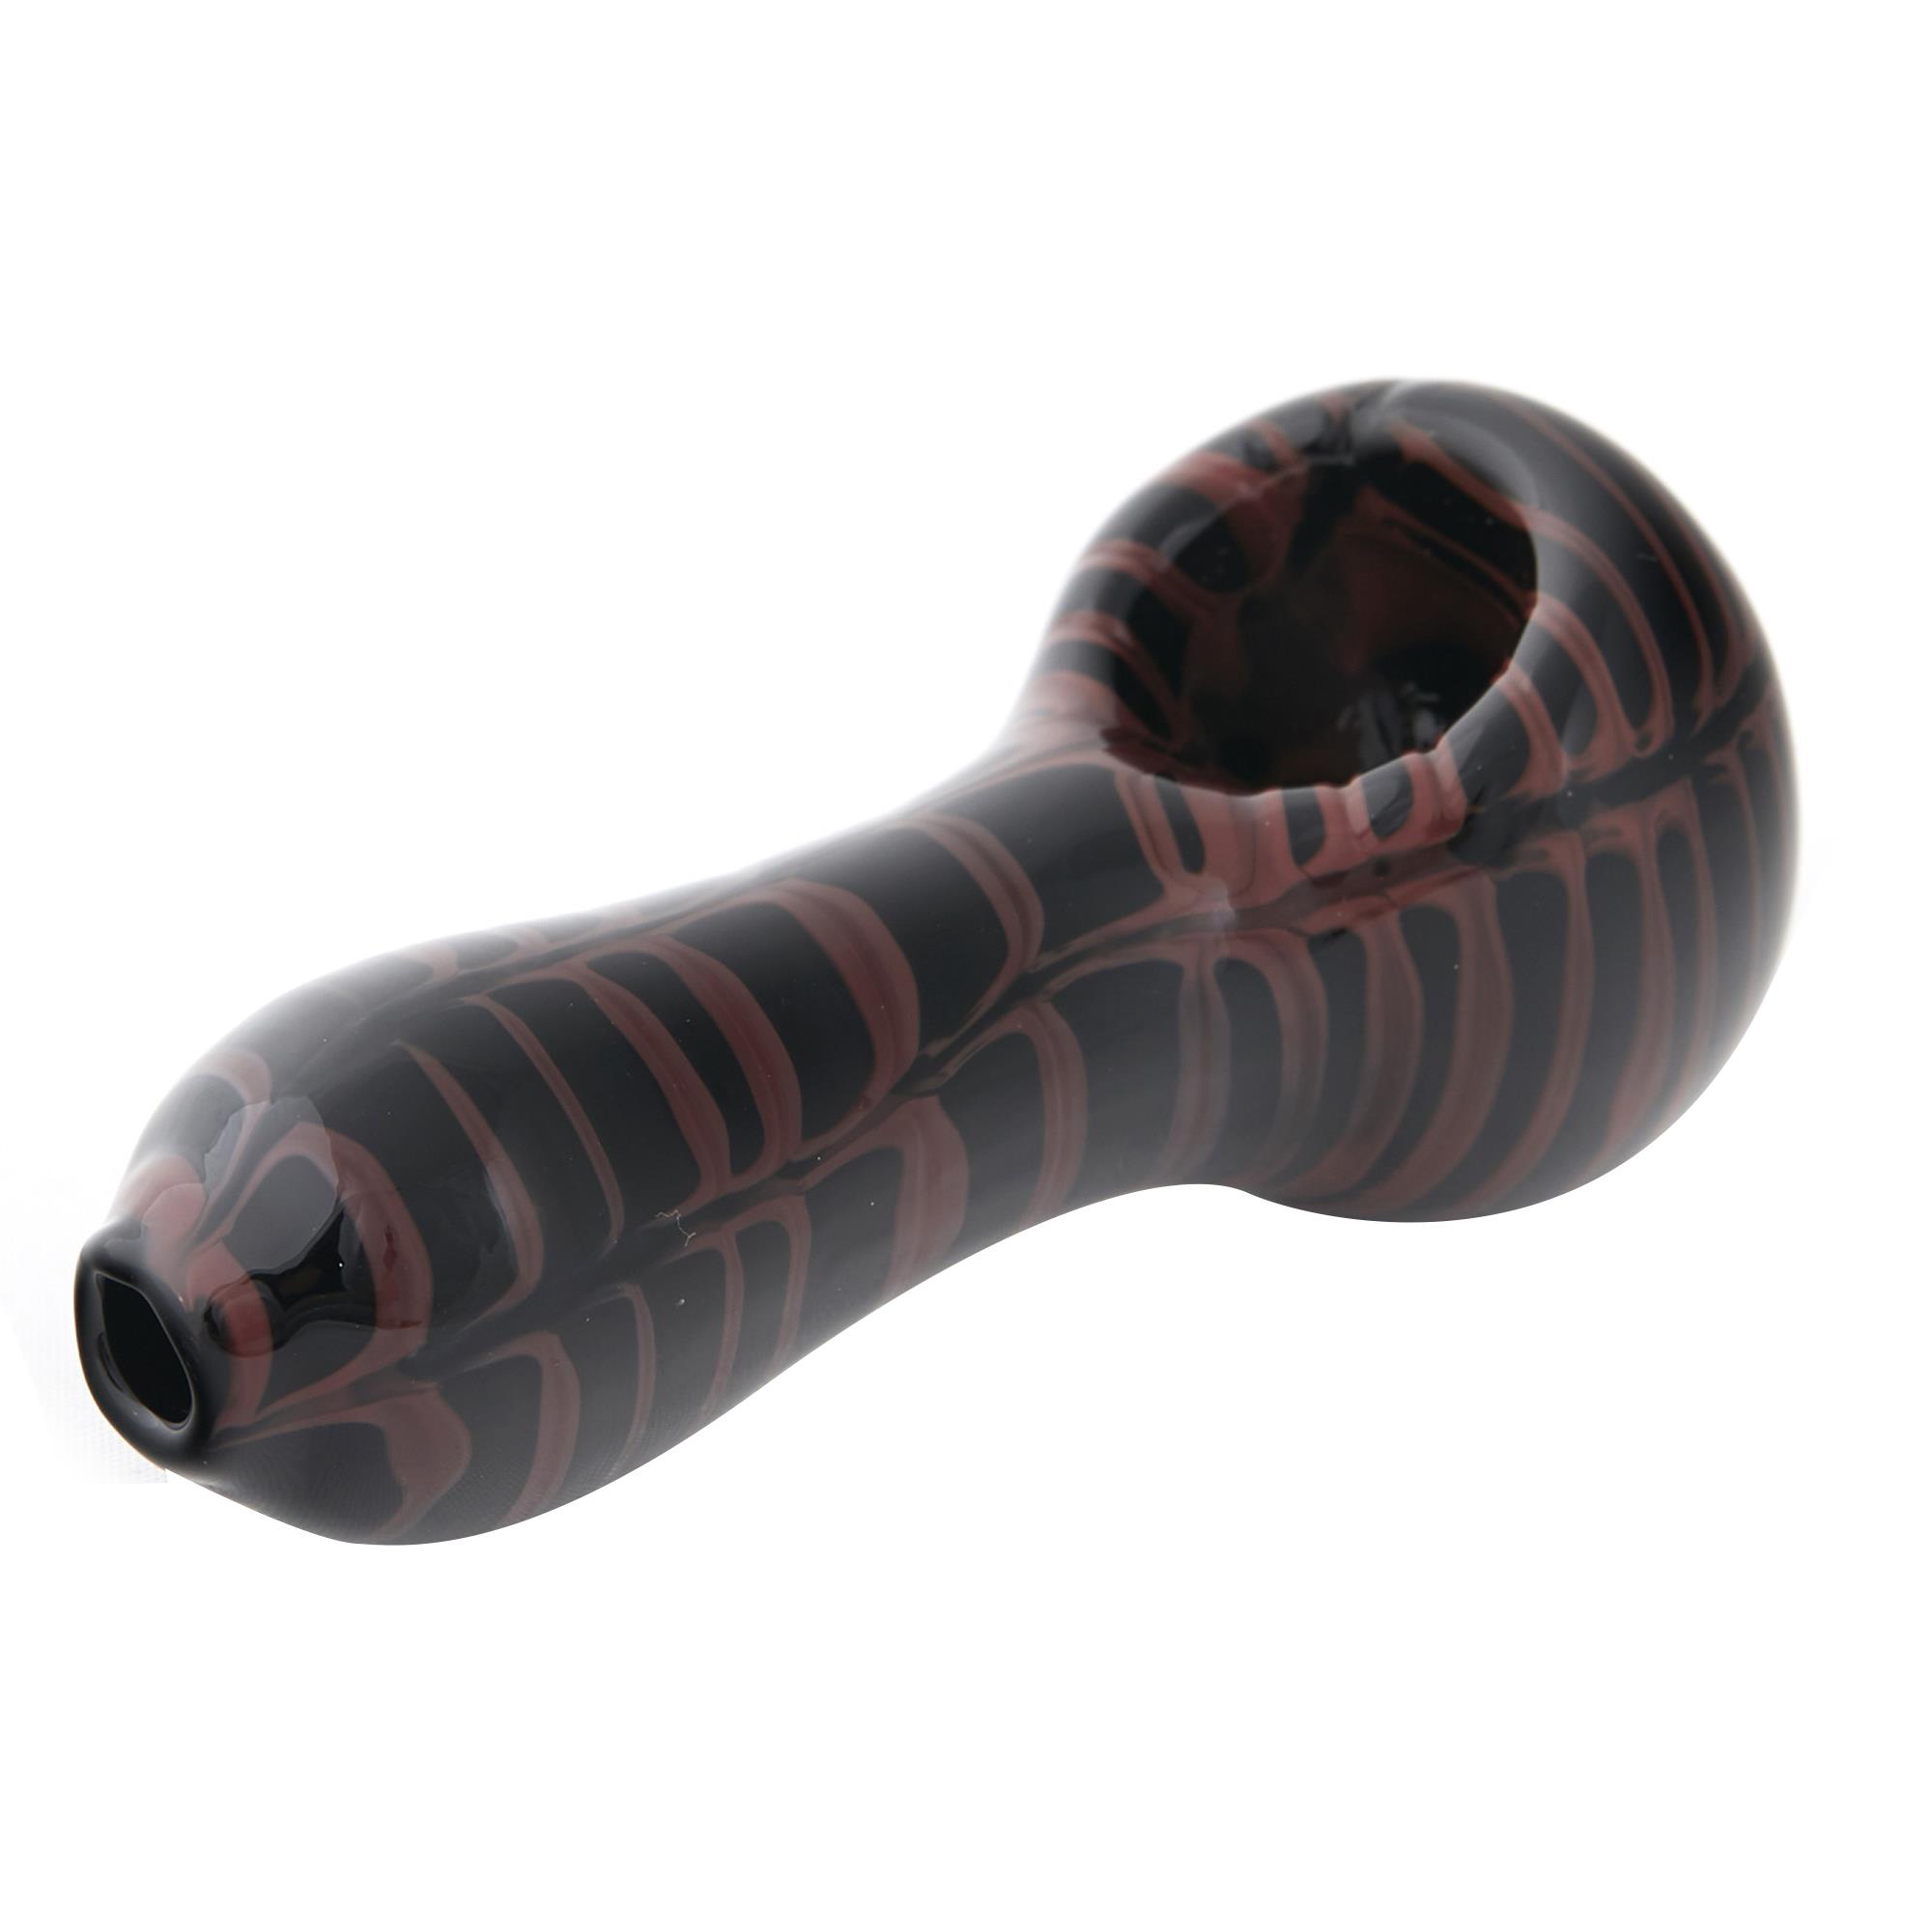 SITH LORD SPOON PIPE